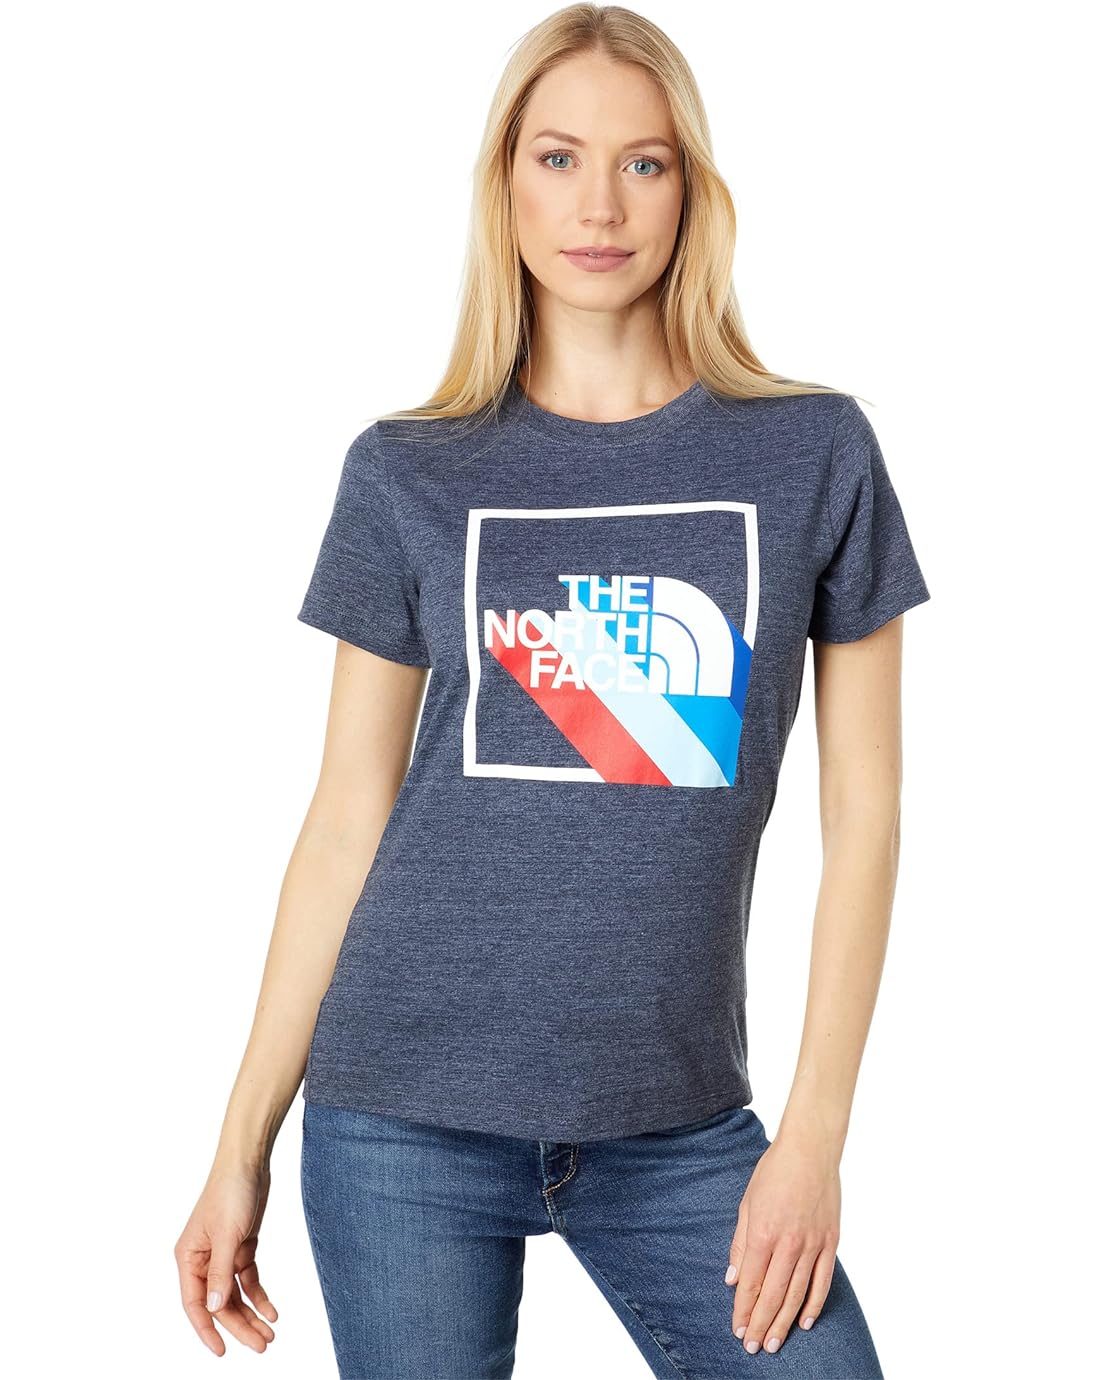 The North Face Americana Tri-Blend Short Sleeve Tee